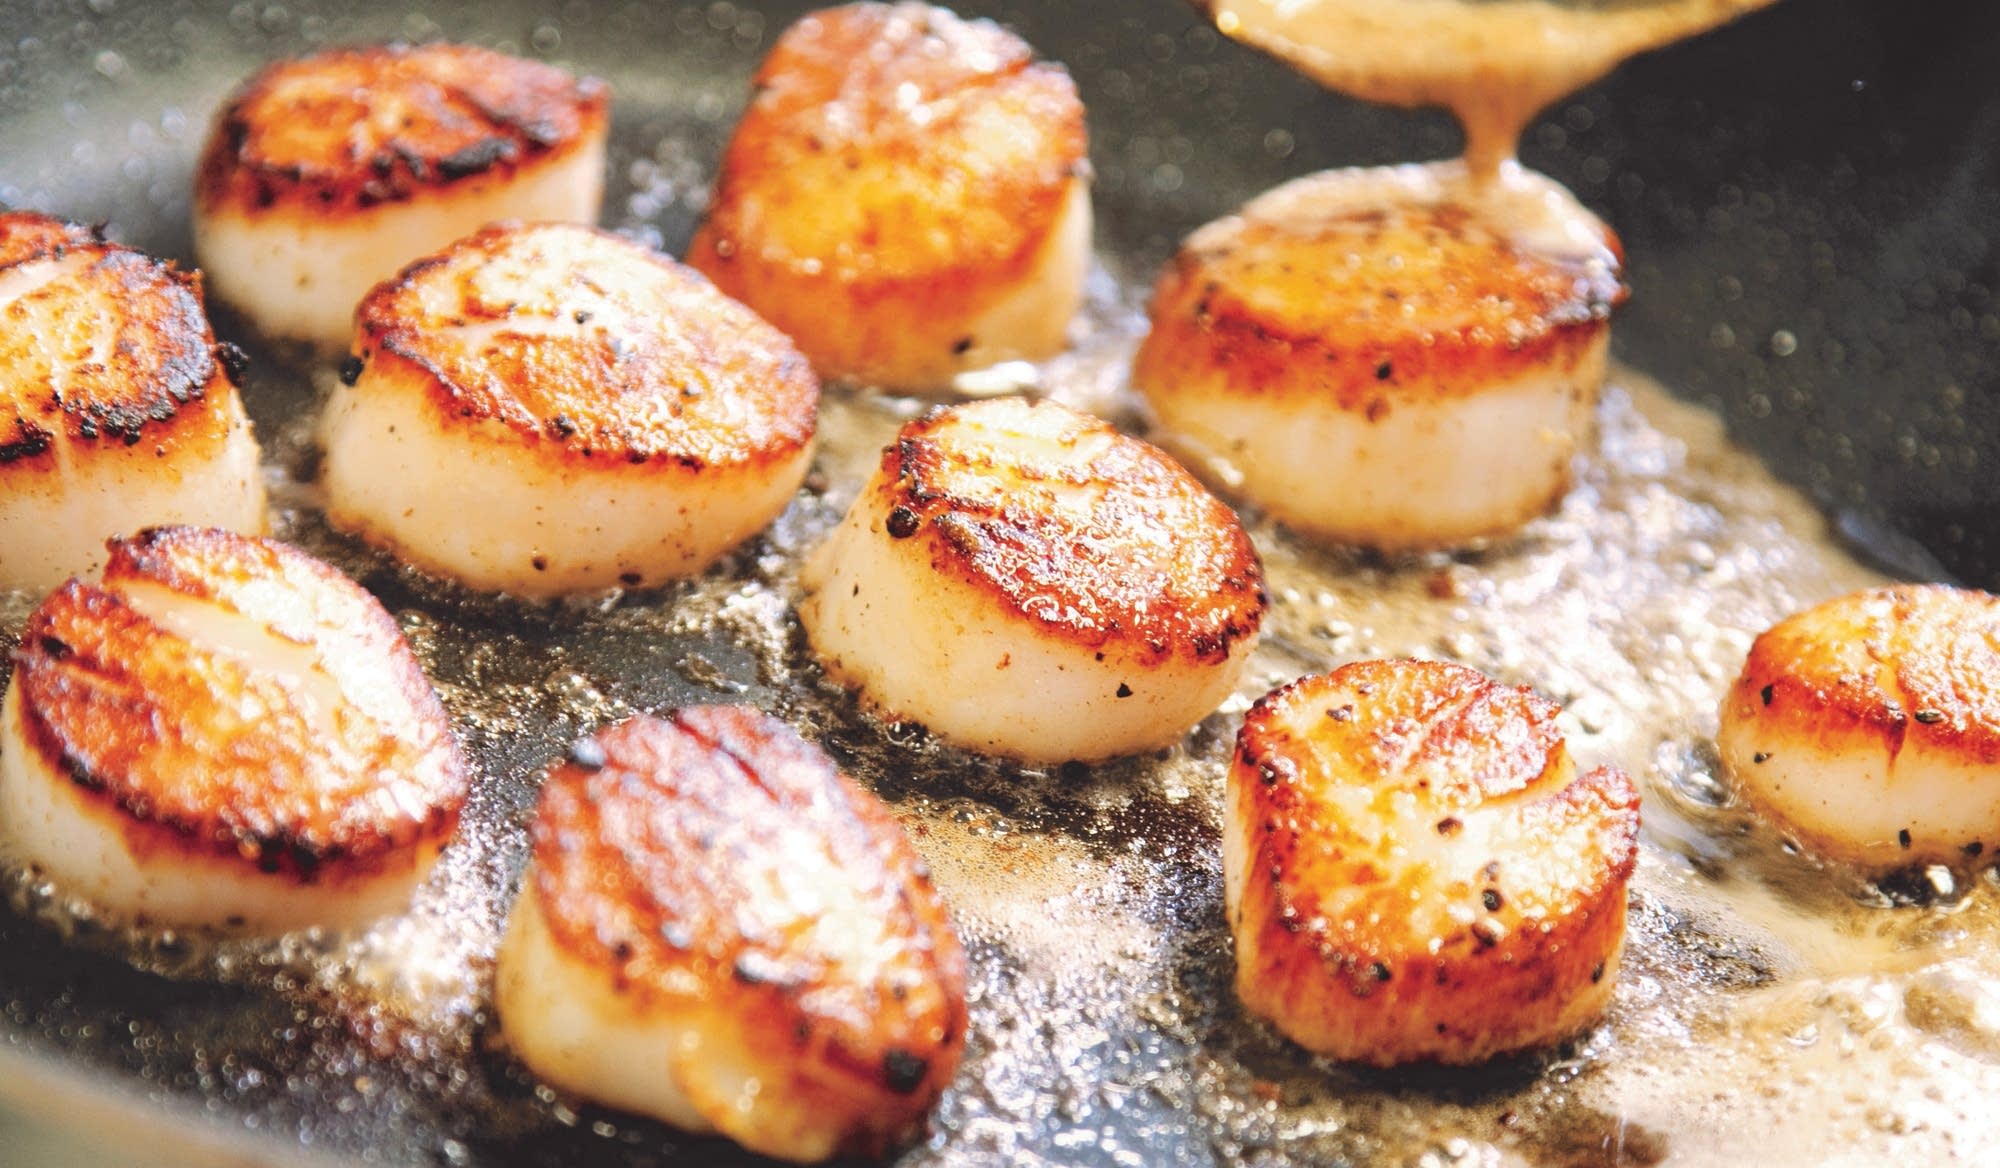 how are scallops kept fresh and what is the difference between diver dry and processed scallops